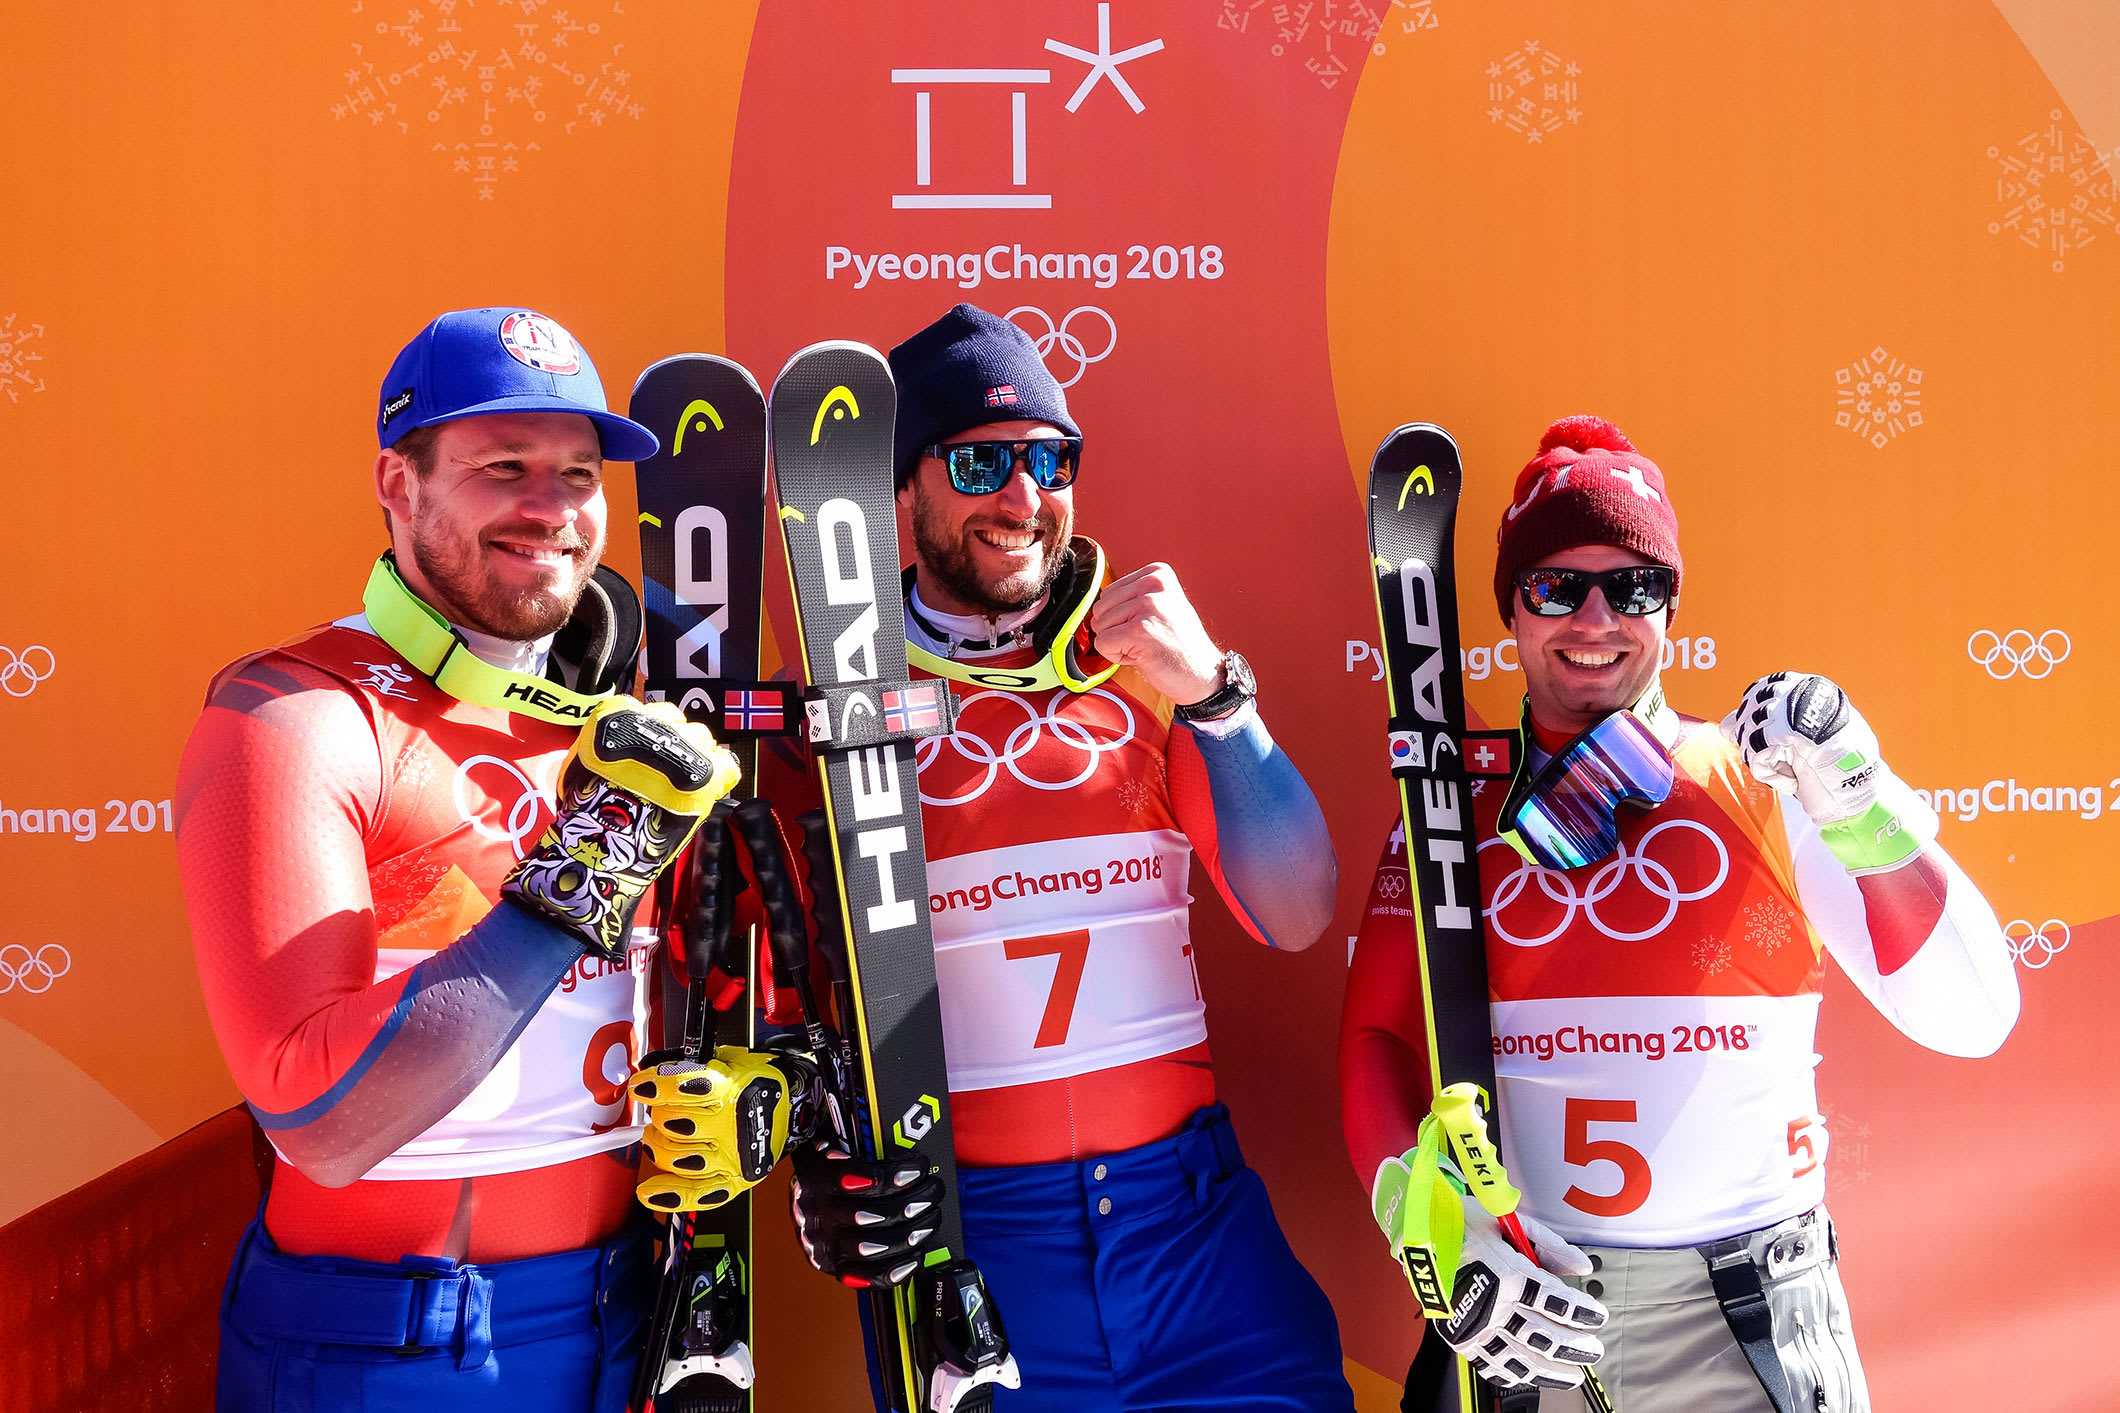 Aksel Lund Svindal has won gold in one of the Olympic Winter Games’ most classic events, the men’s downhill, at PyeongChang 2018 on 15 February On a spectacular day for Norway, his teammate Kjetil Jansrud took silver Current world champion Beat Feuz  was third